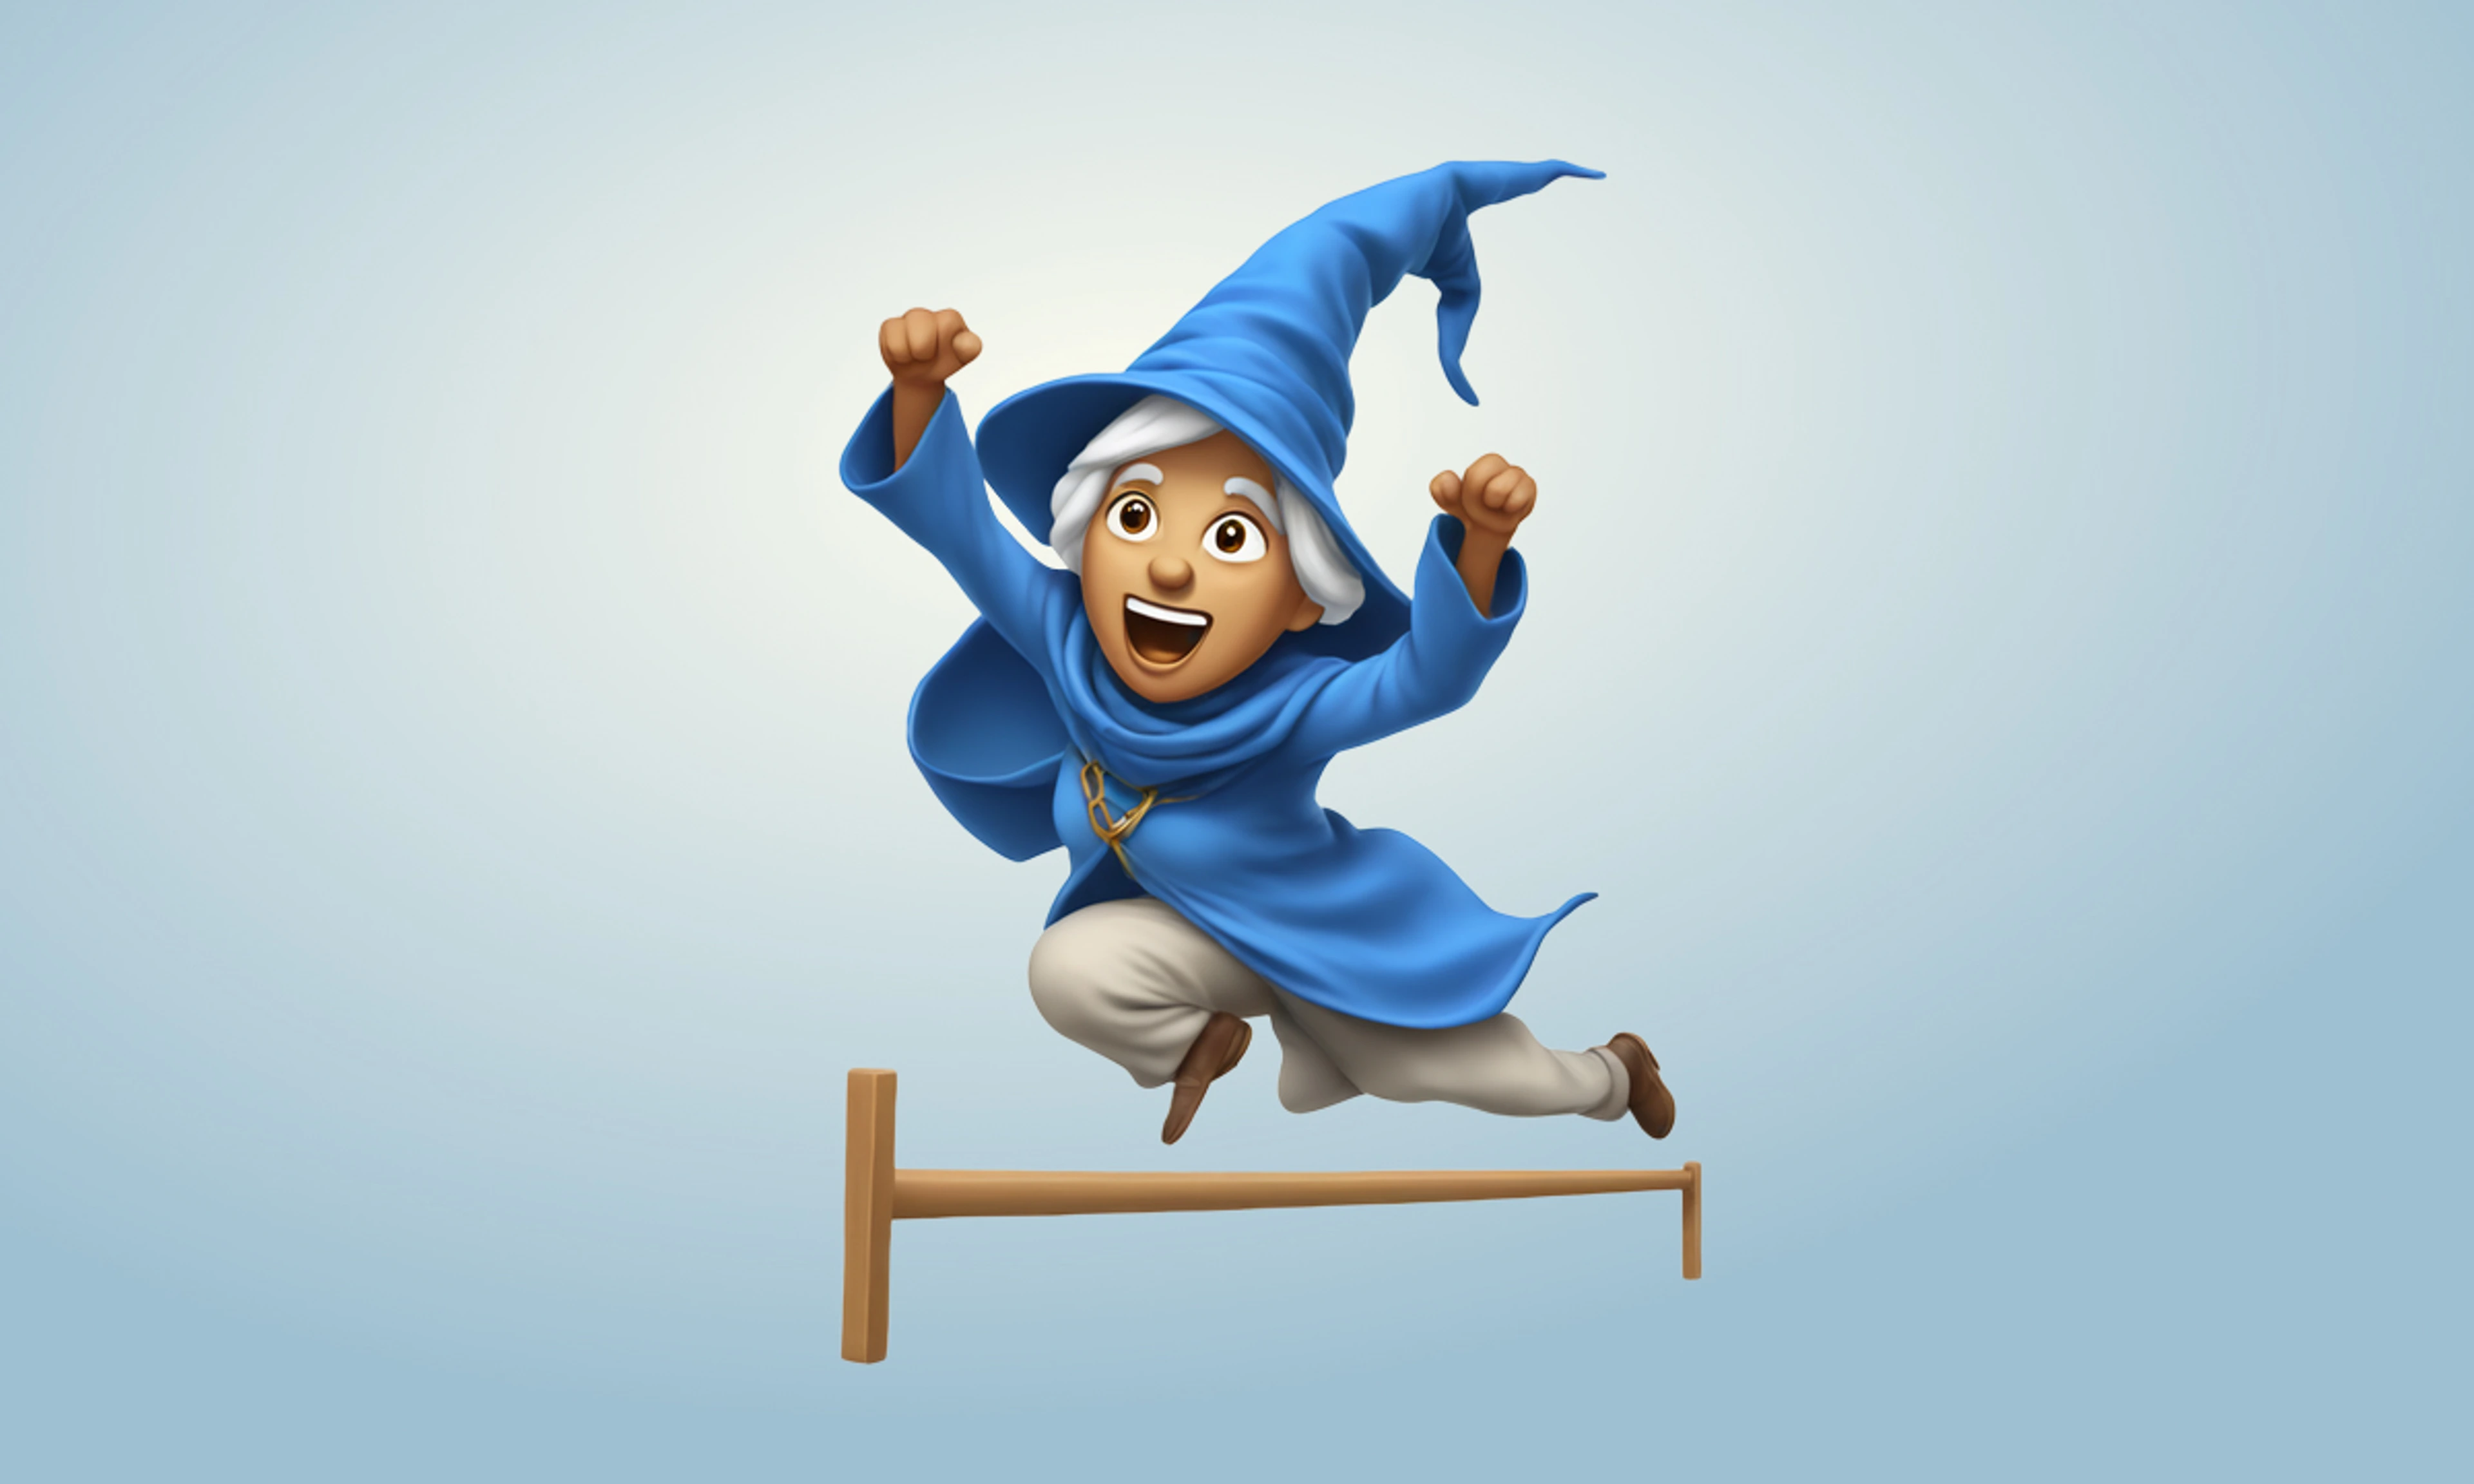 A cartoon woman with gray hair and a wizard robe and hat jumping over a hurdle